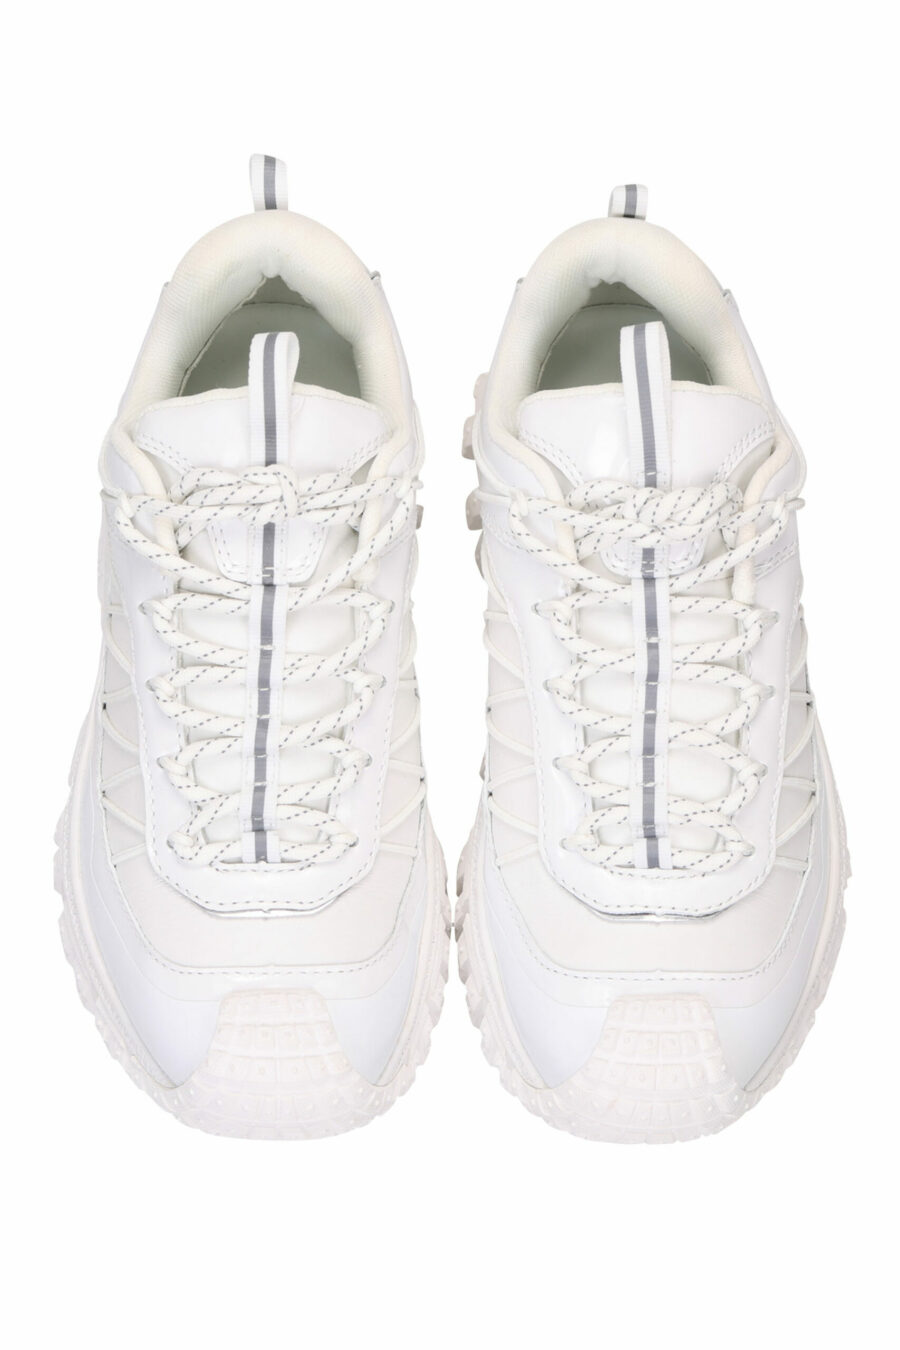 White trainers with thick soles and mini-logo - 5059529319099 4 scaled